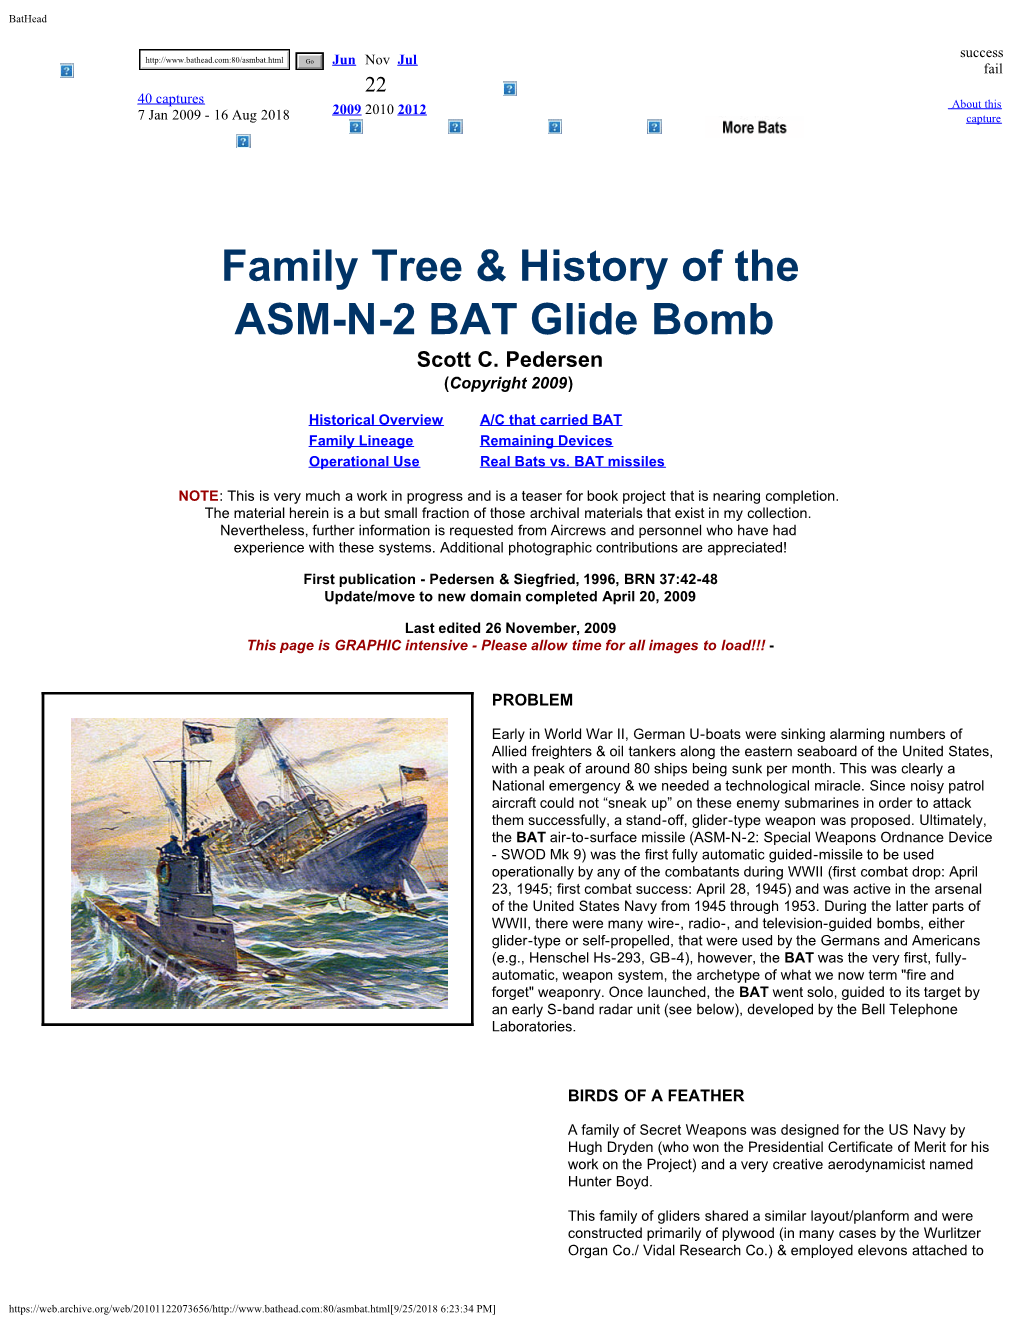 Family Tree & History of the ASM-N-2 BAT Glide Bomb